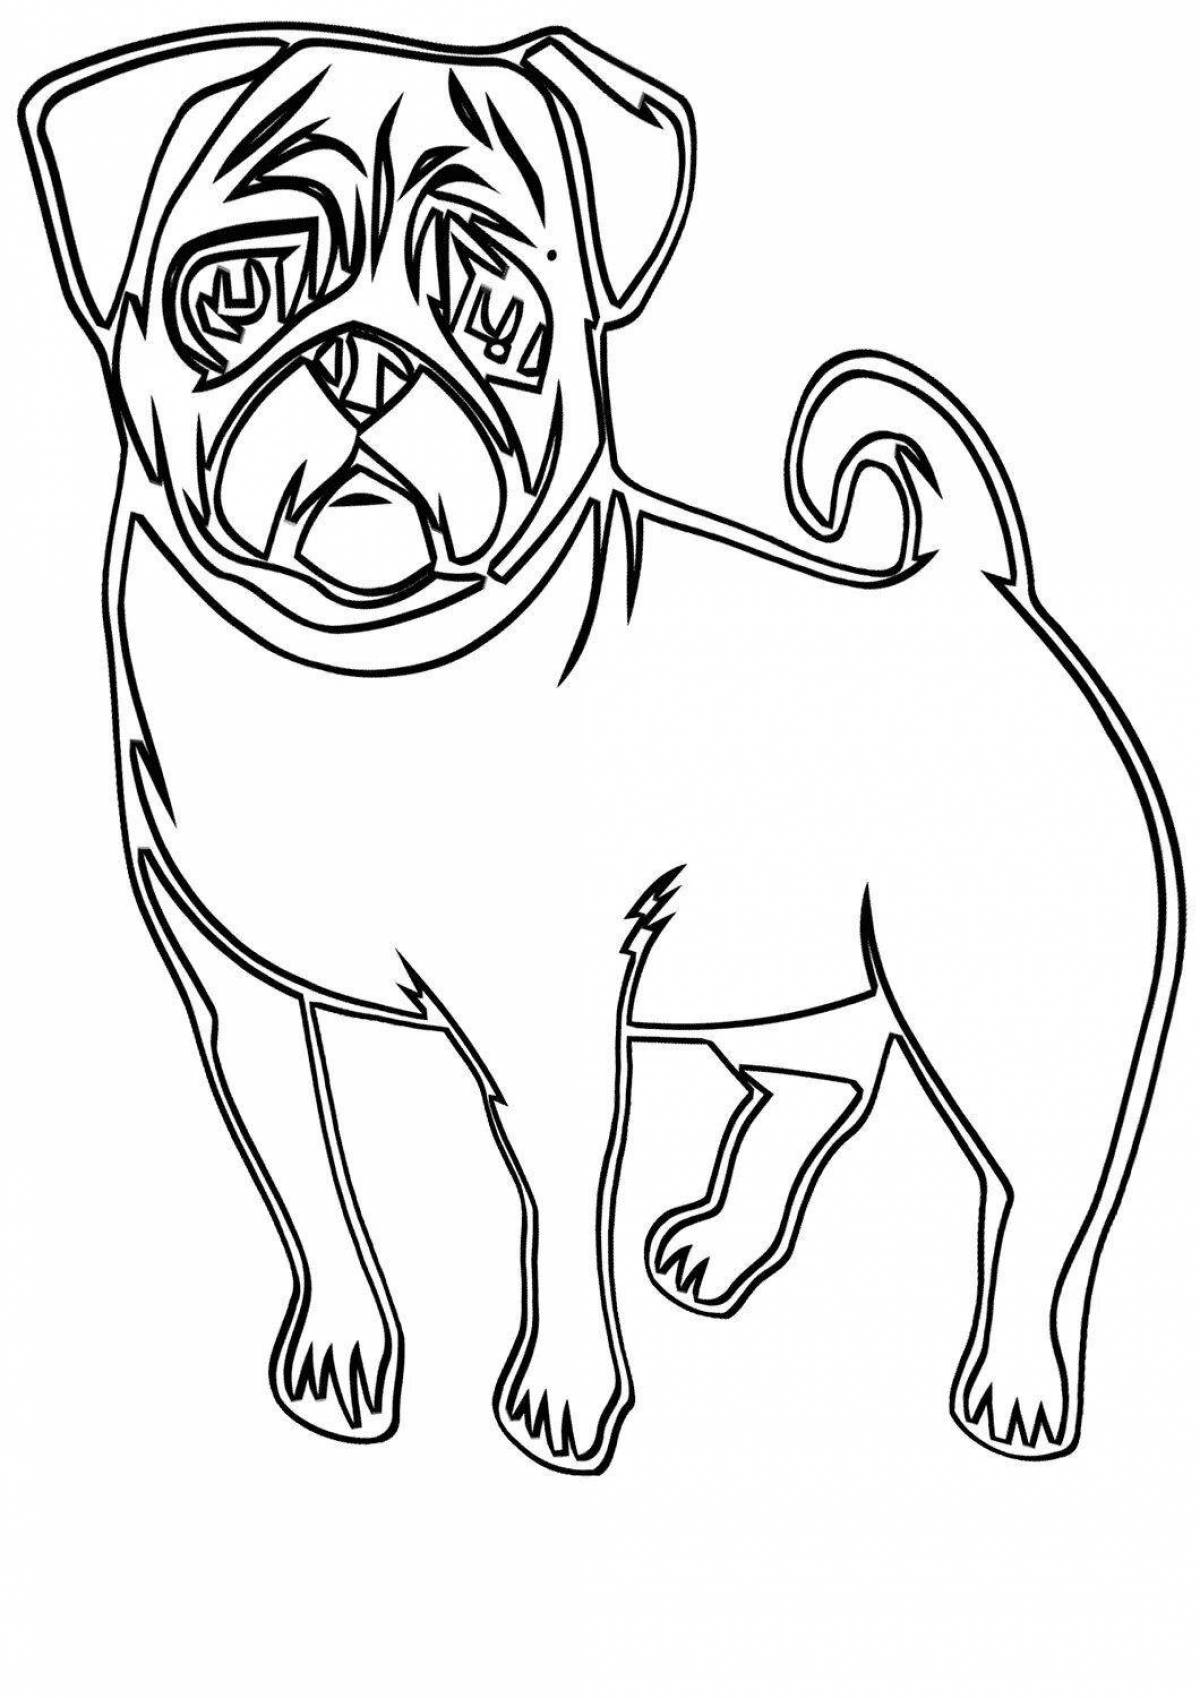 Coloring page adorable pug for kids